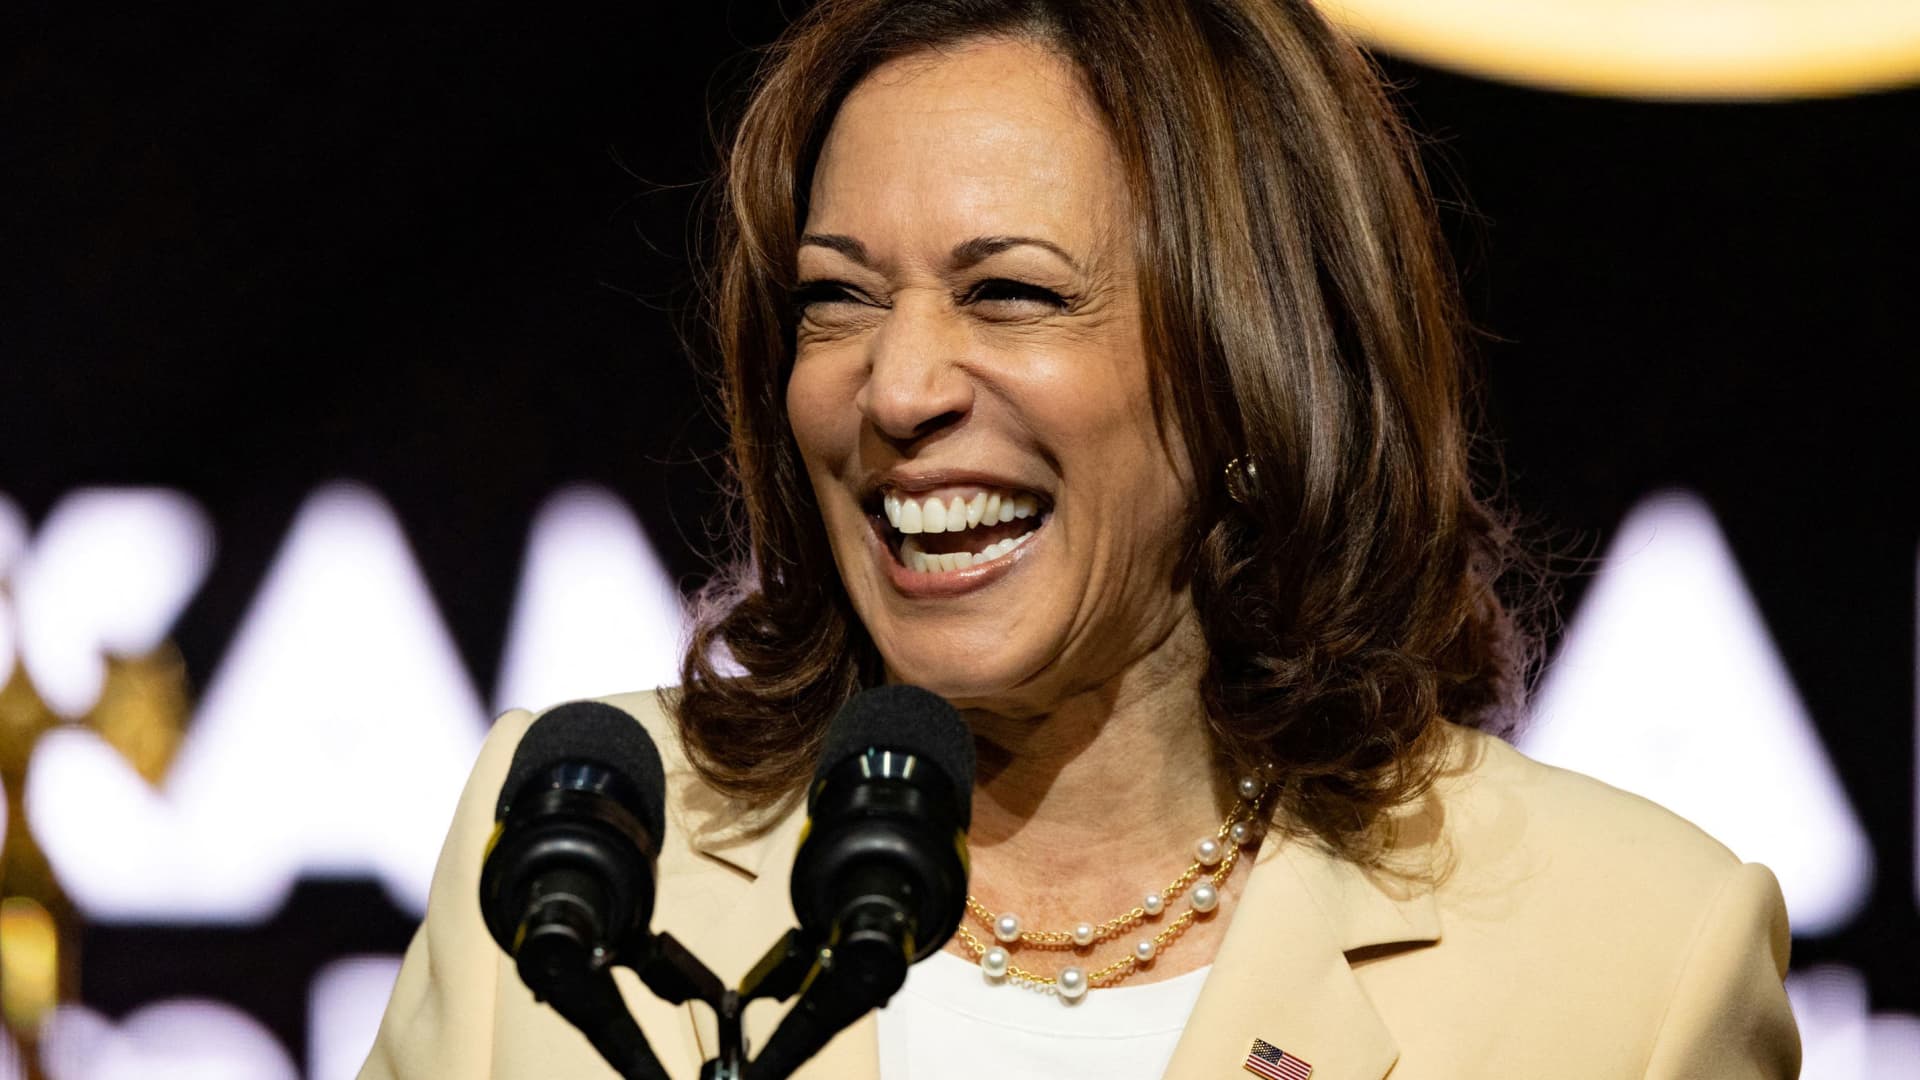 U.S. Vice President Kamala Harris smiles during her speech at the NAACP National Convention in Atlantic City, New Jersey, U.S. July 18, 2022.